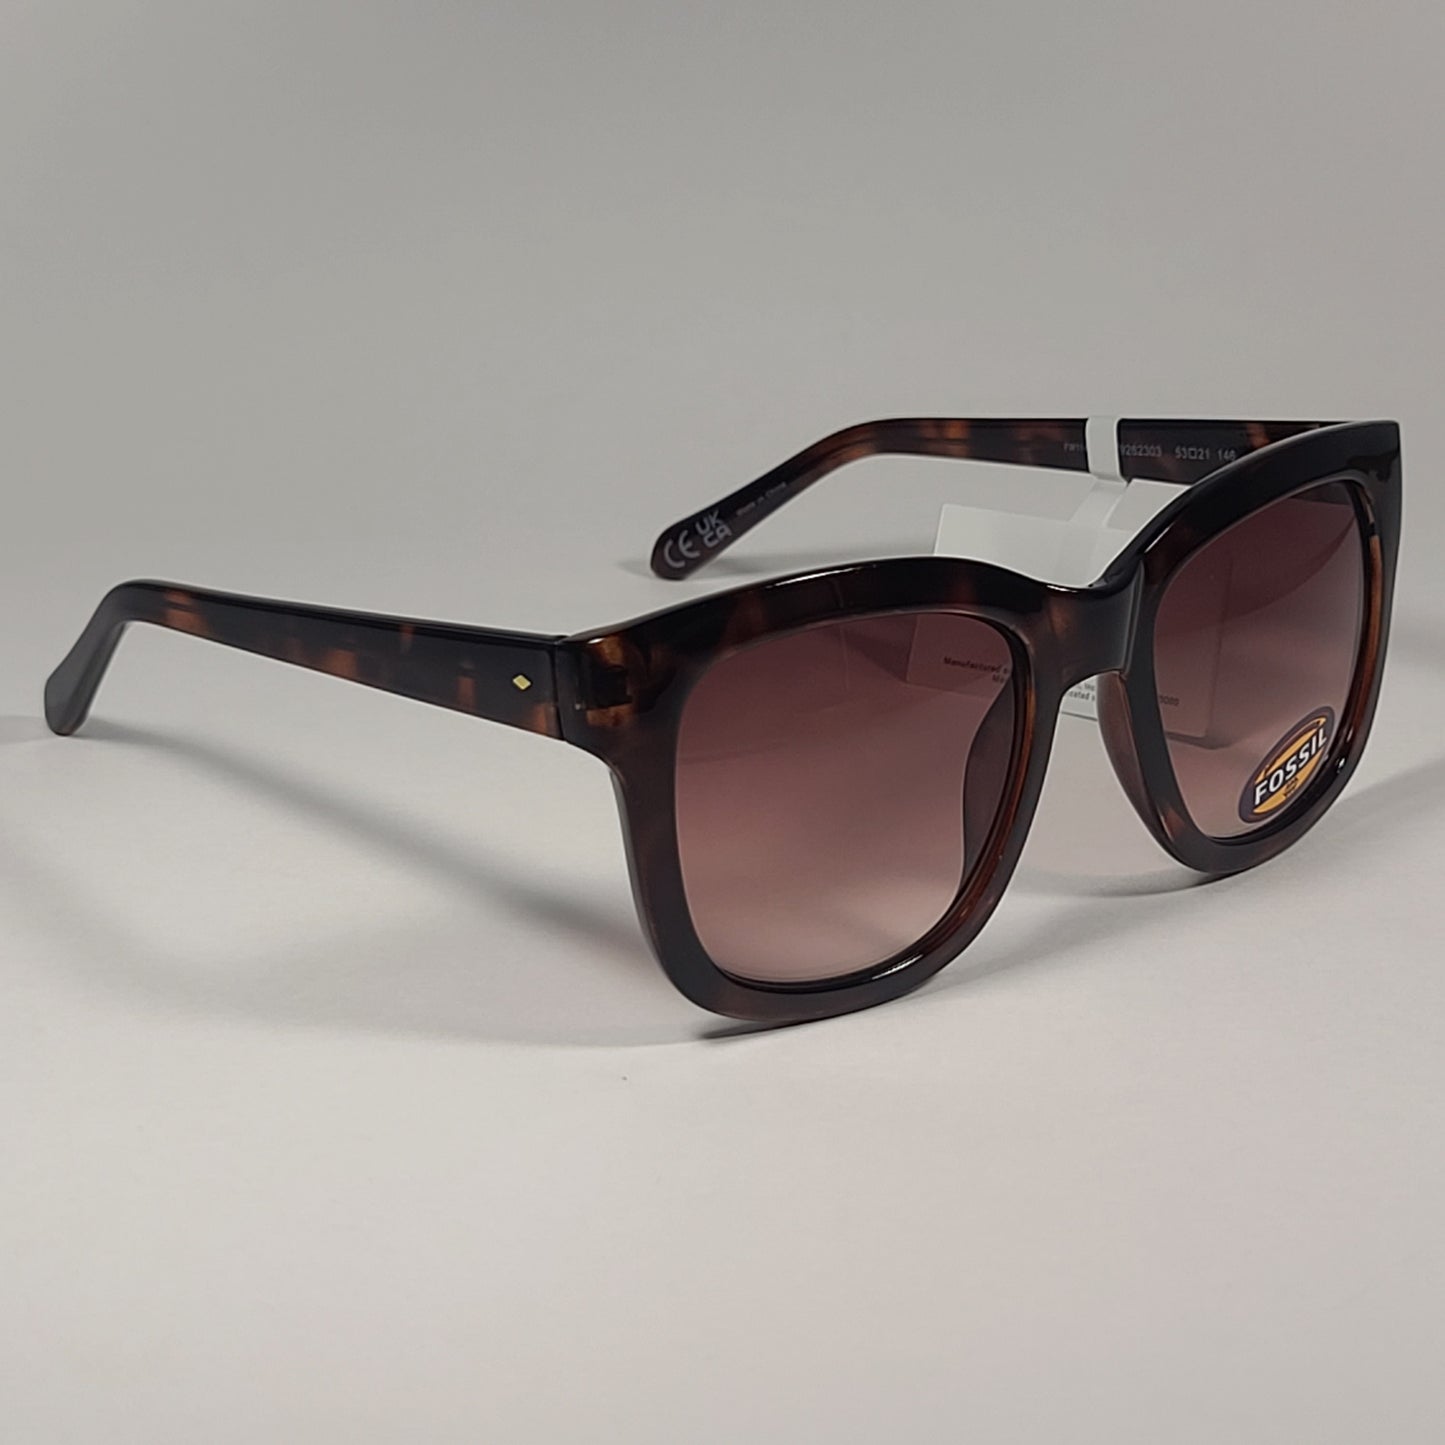 Fossil FW114 Large Square Sunglasses Brown Tortoise Frame Brown Gradient Lens - Sunglasses